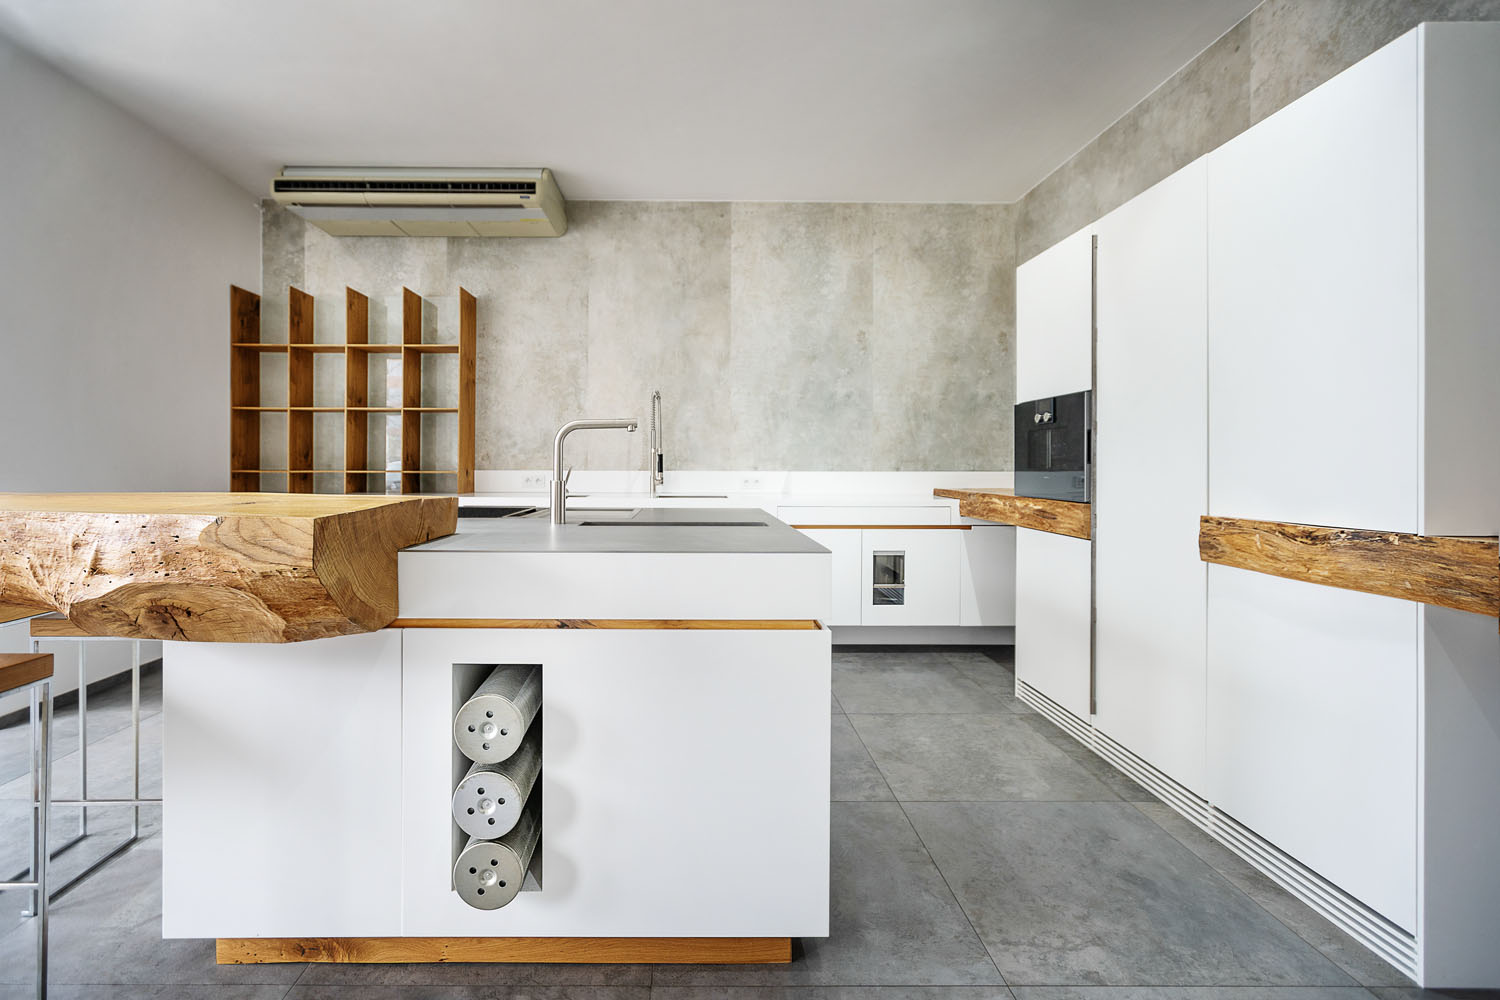 plan 3 kitchens / plan 3 kitchen Showroom in Zlin / kitchen with a potential to become a trend